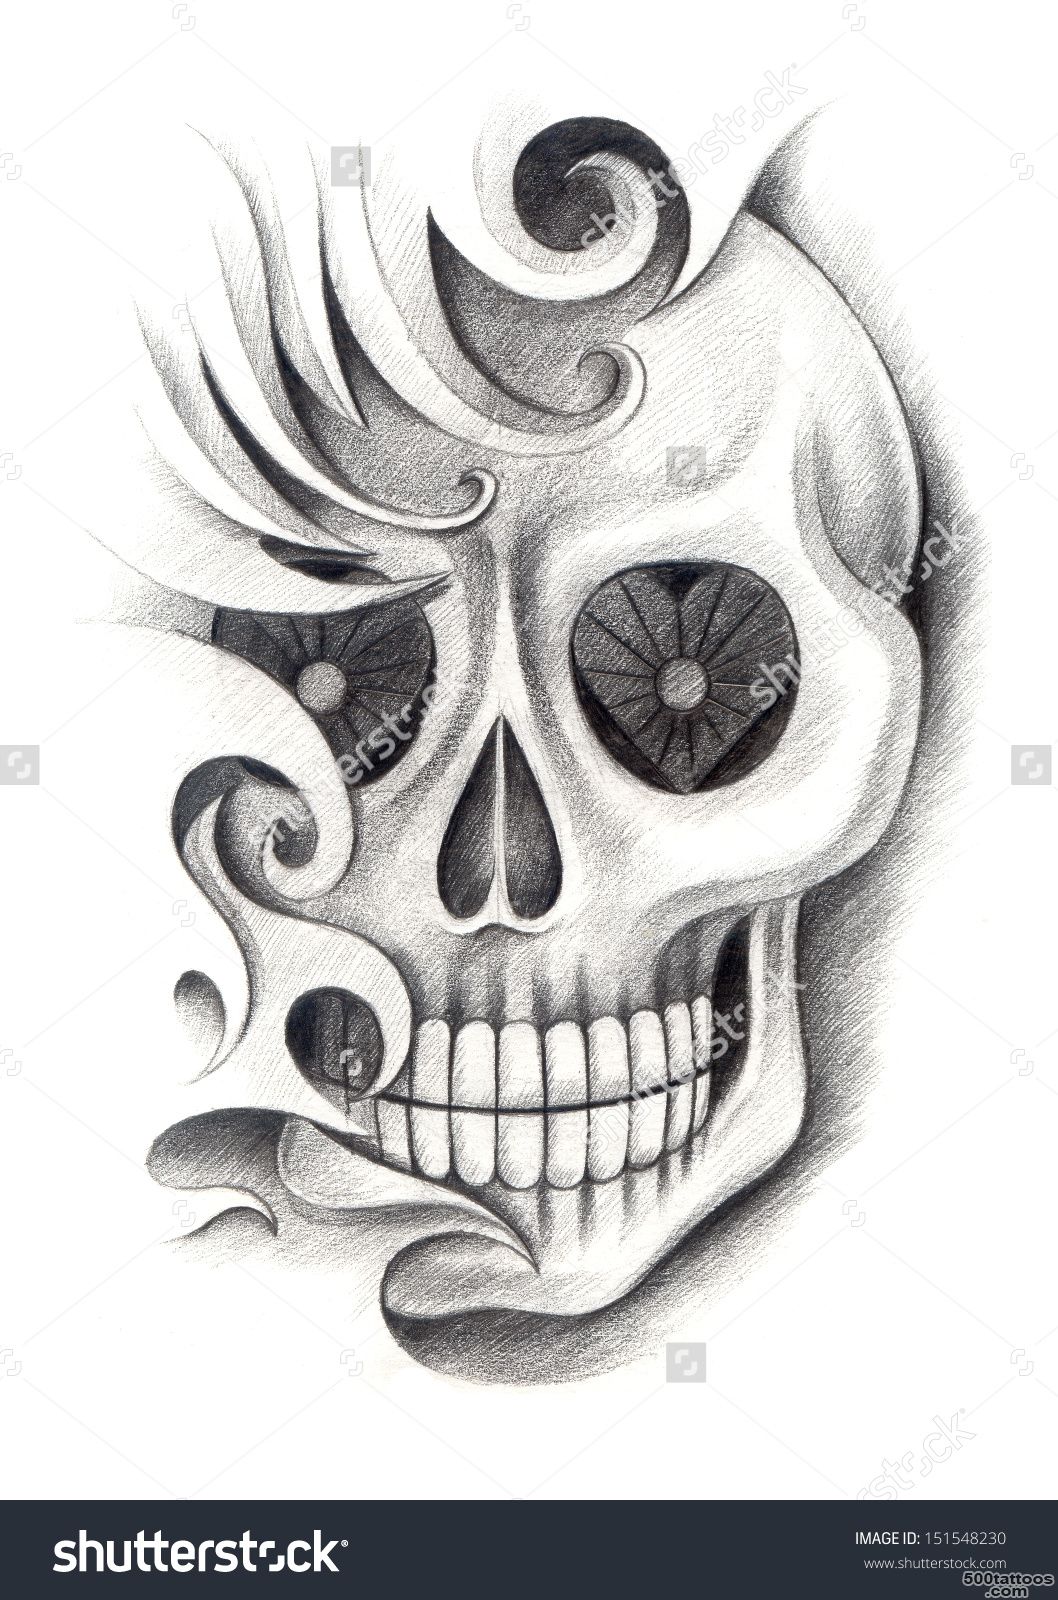 Skull Tattoo Stock Photos, Images, amp Pictures  Shutterstock_31